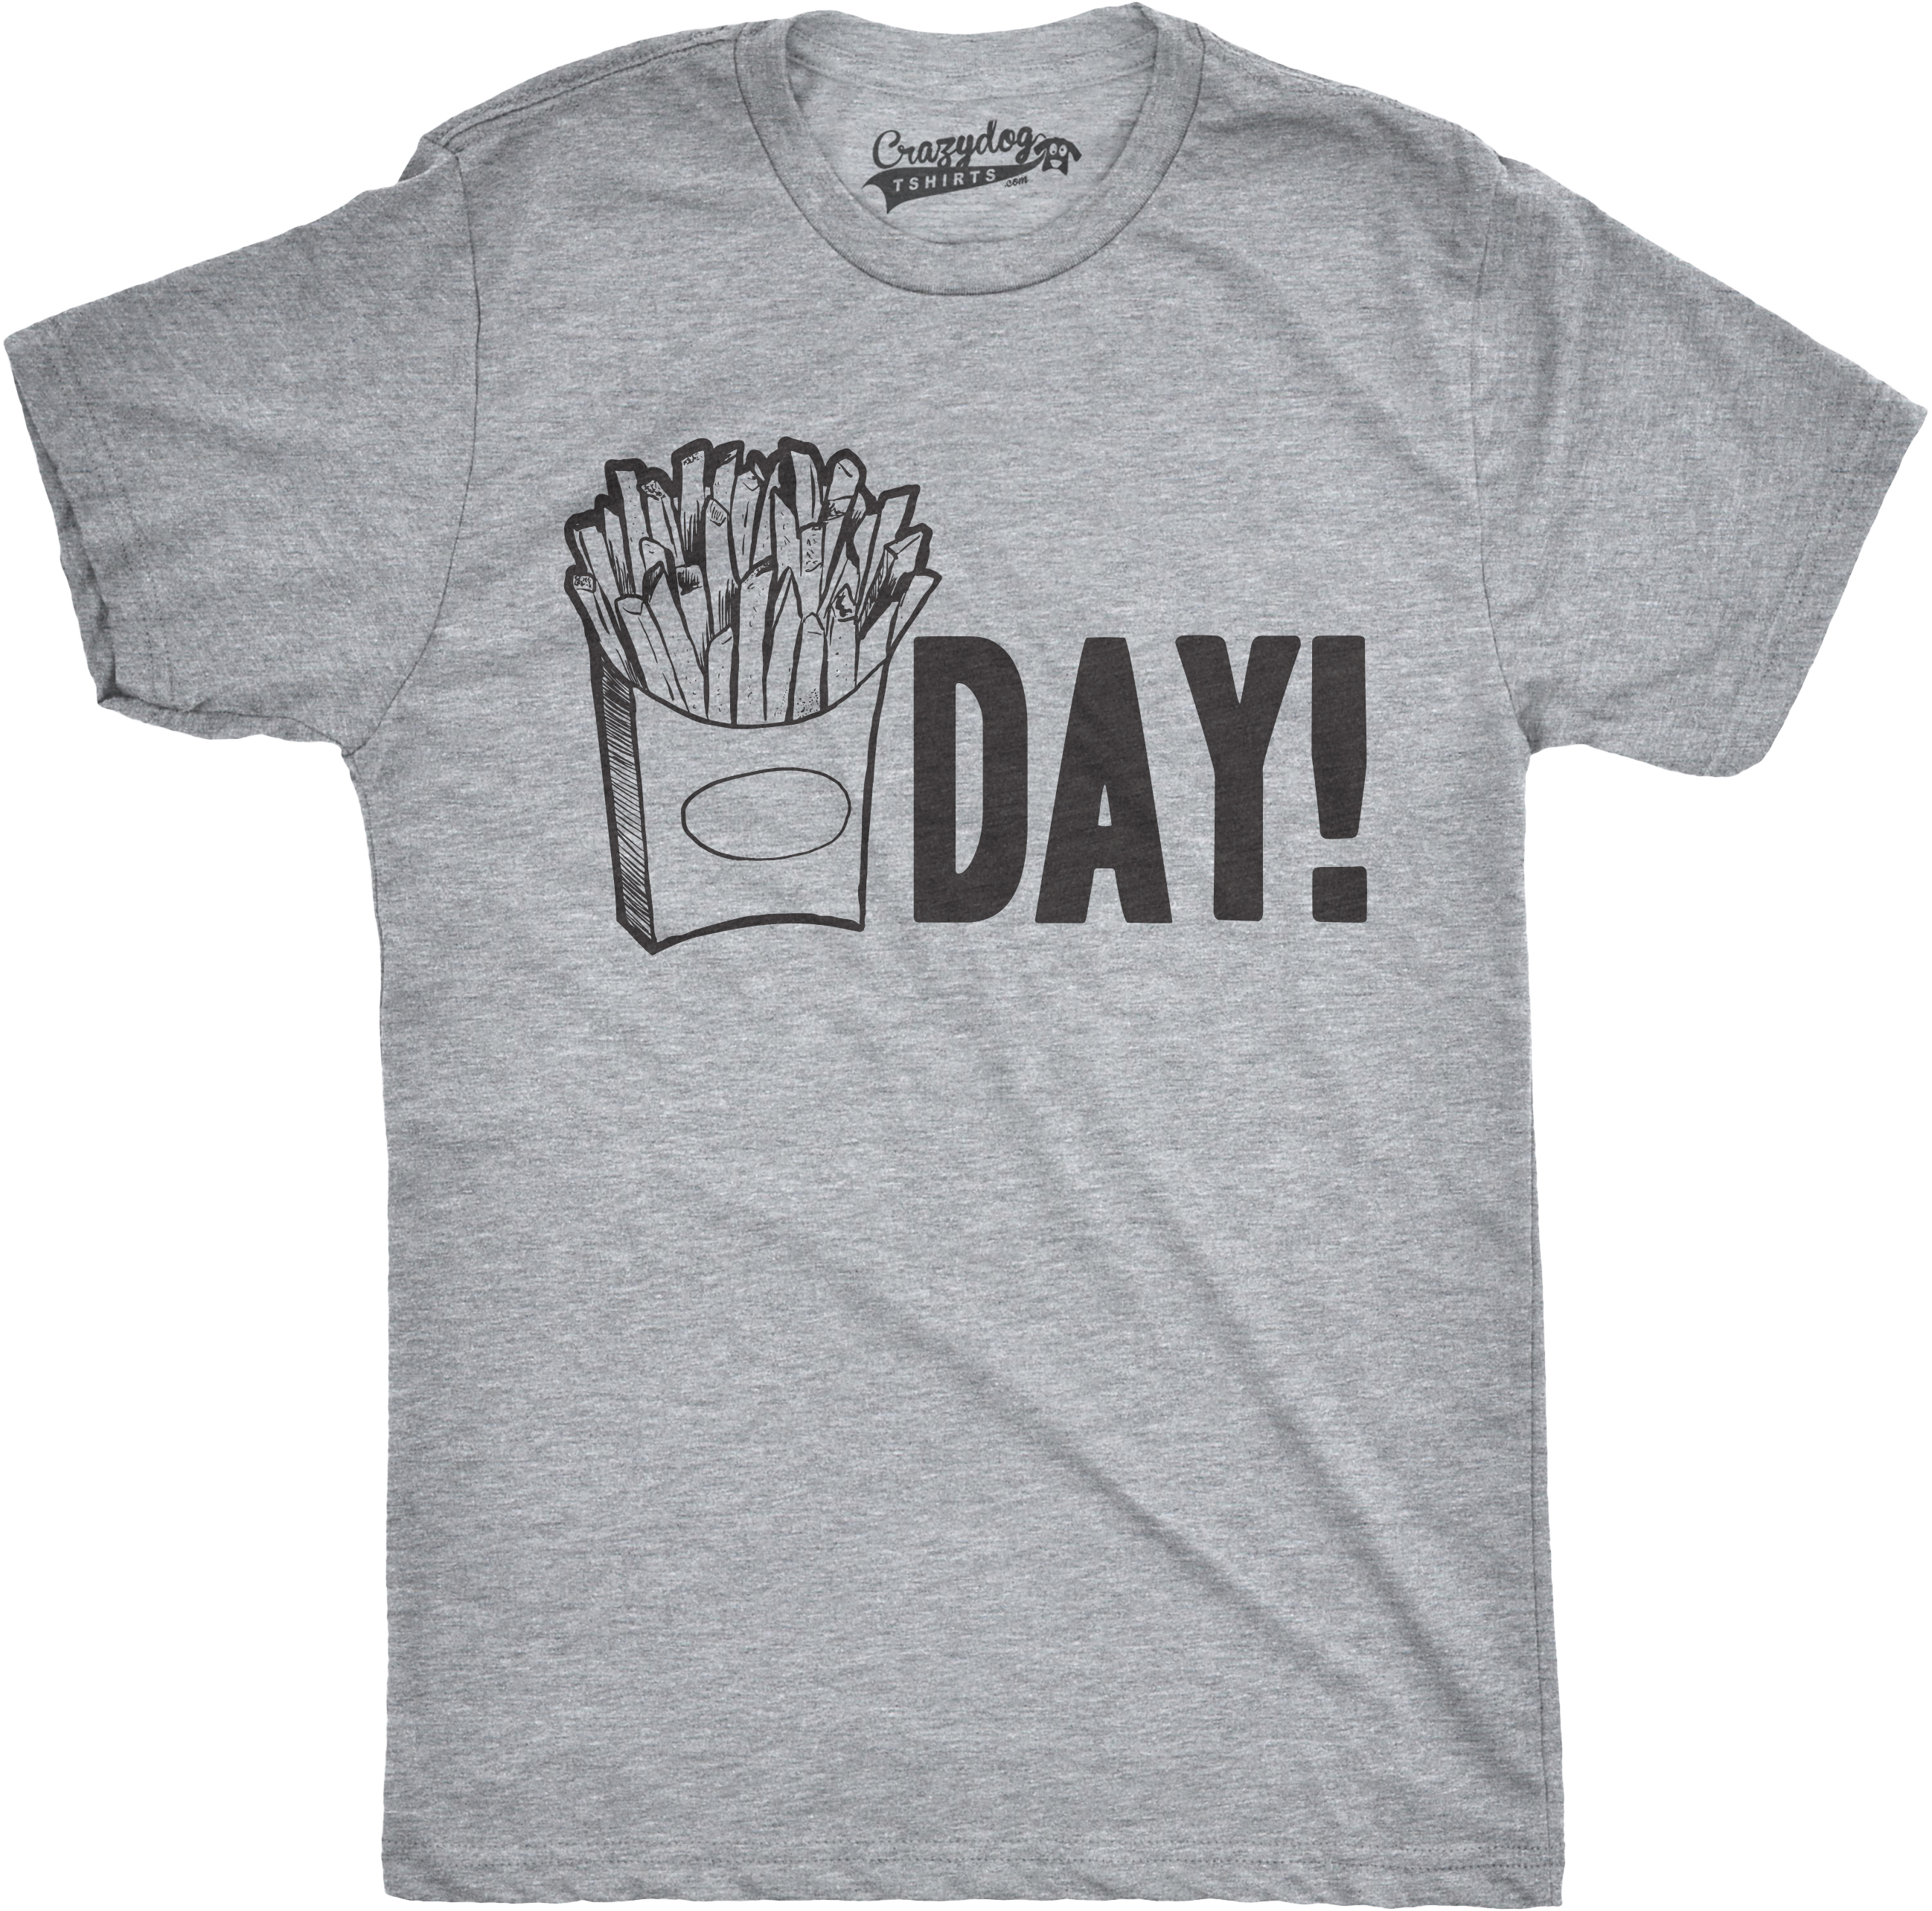 Crazy Dog Tshirts Mens Fry Day Friday T shirt Funny Fast Food French Fry Weekend TGIF Tee